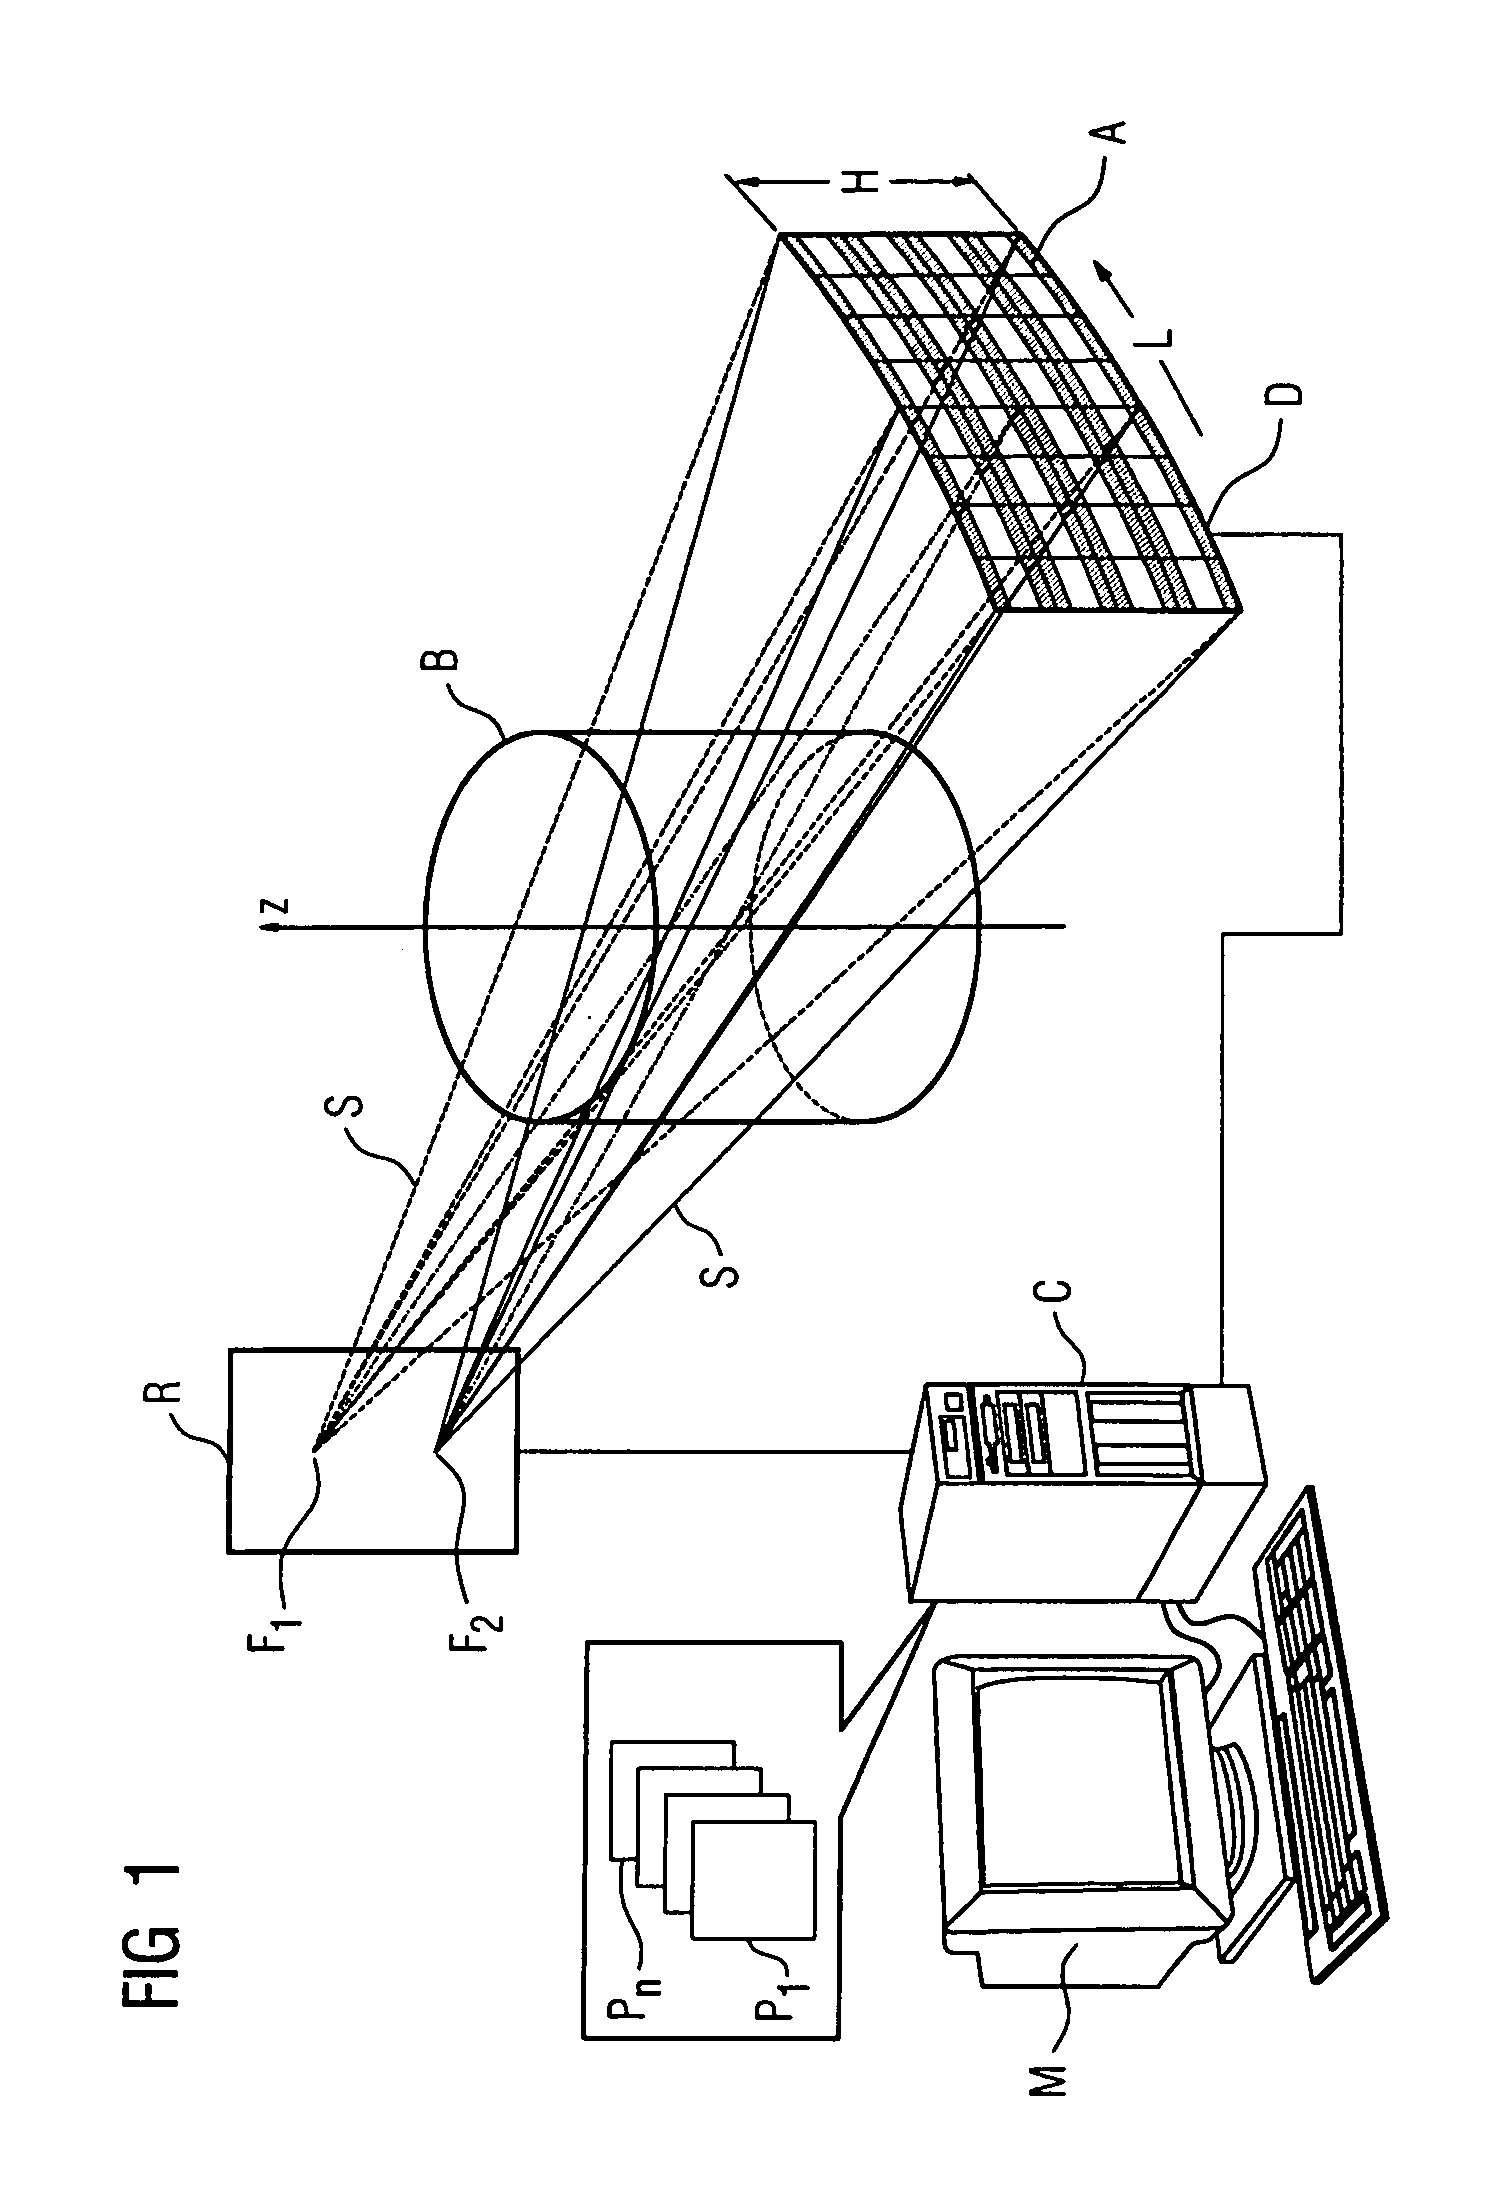 Computed tomography unit having an aperture stop